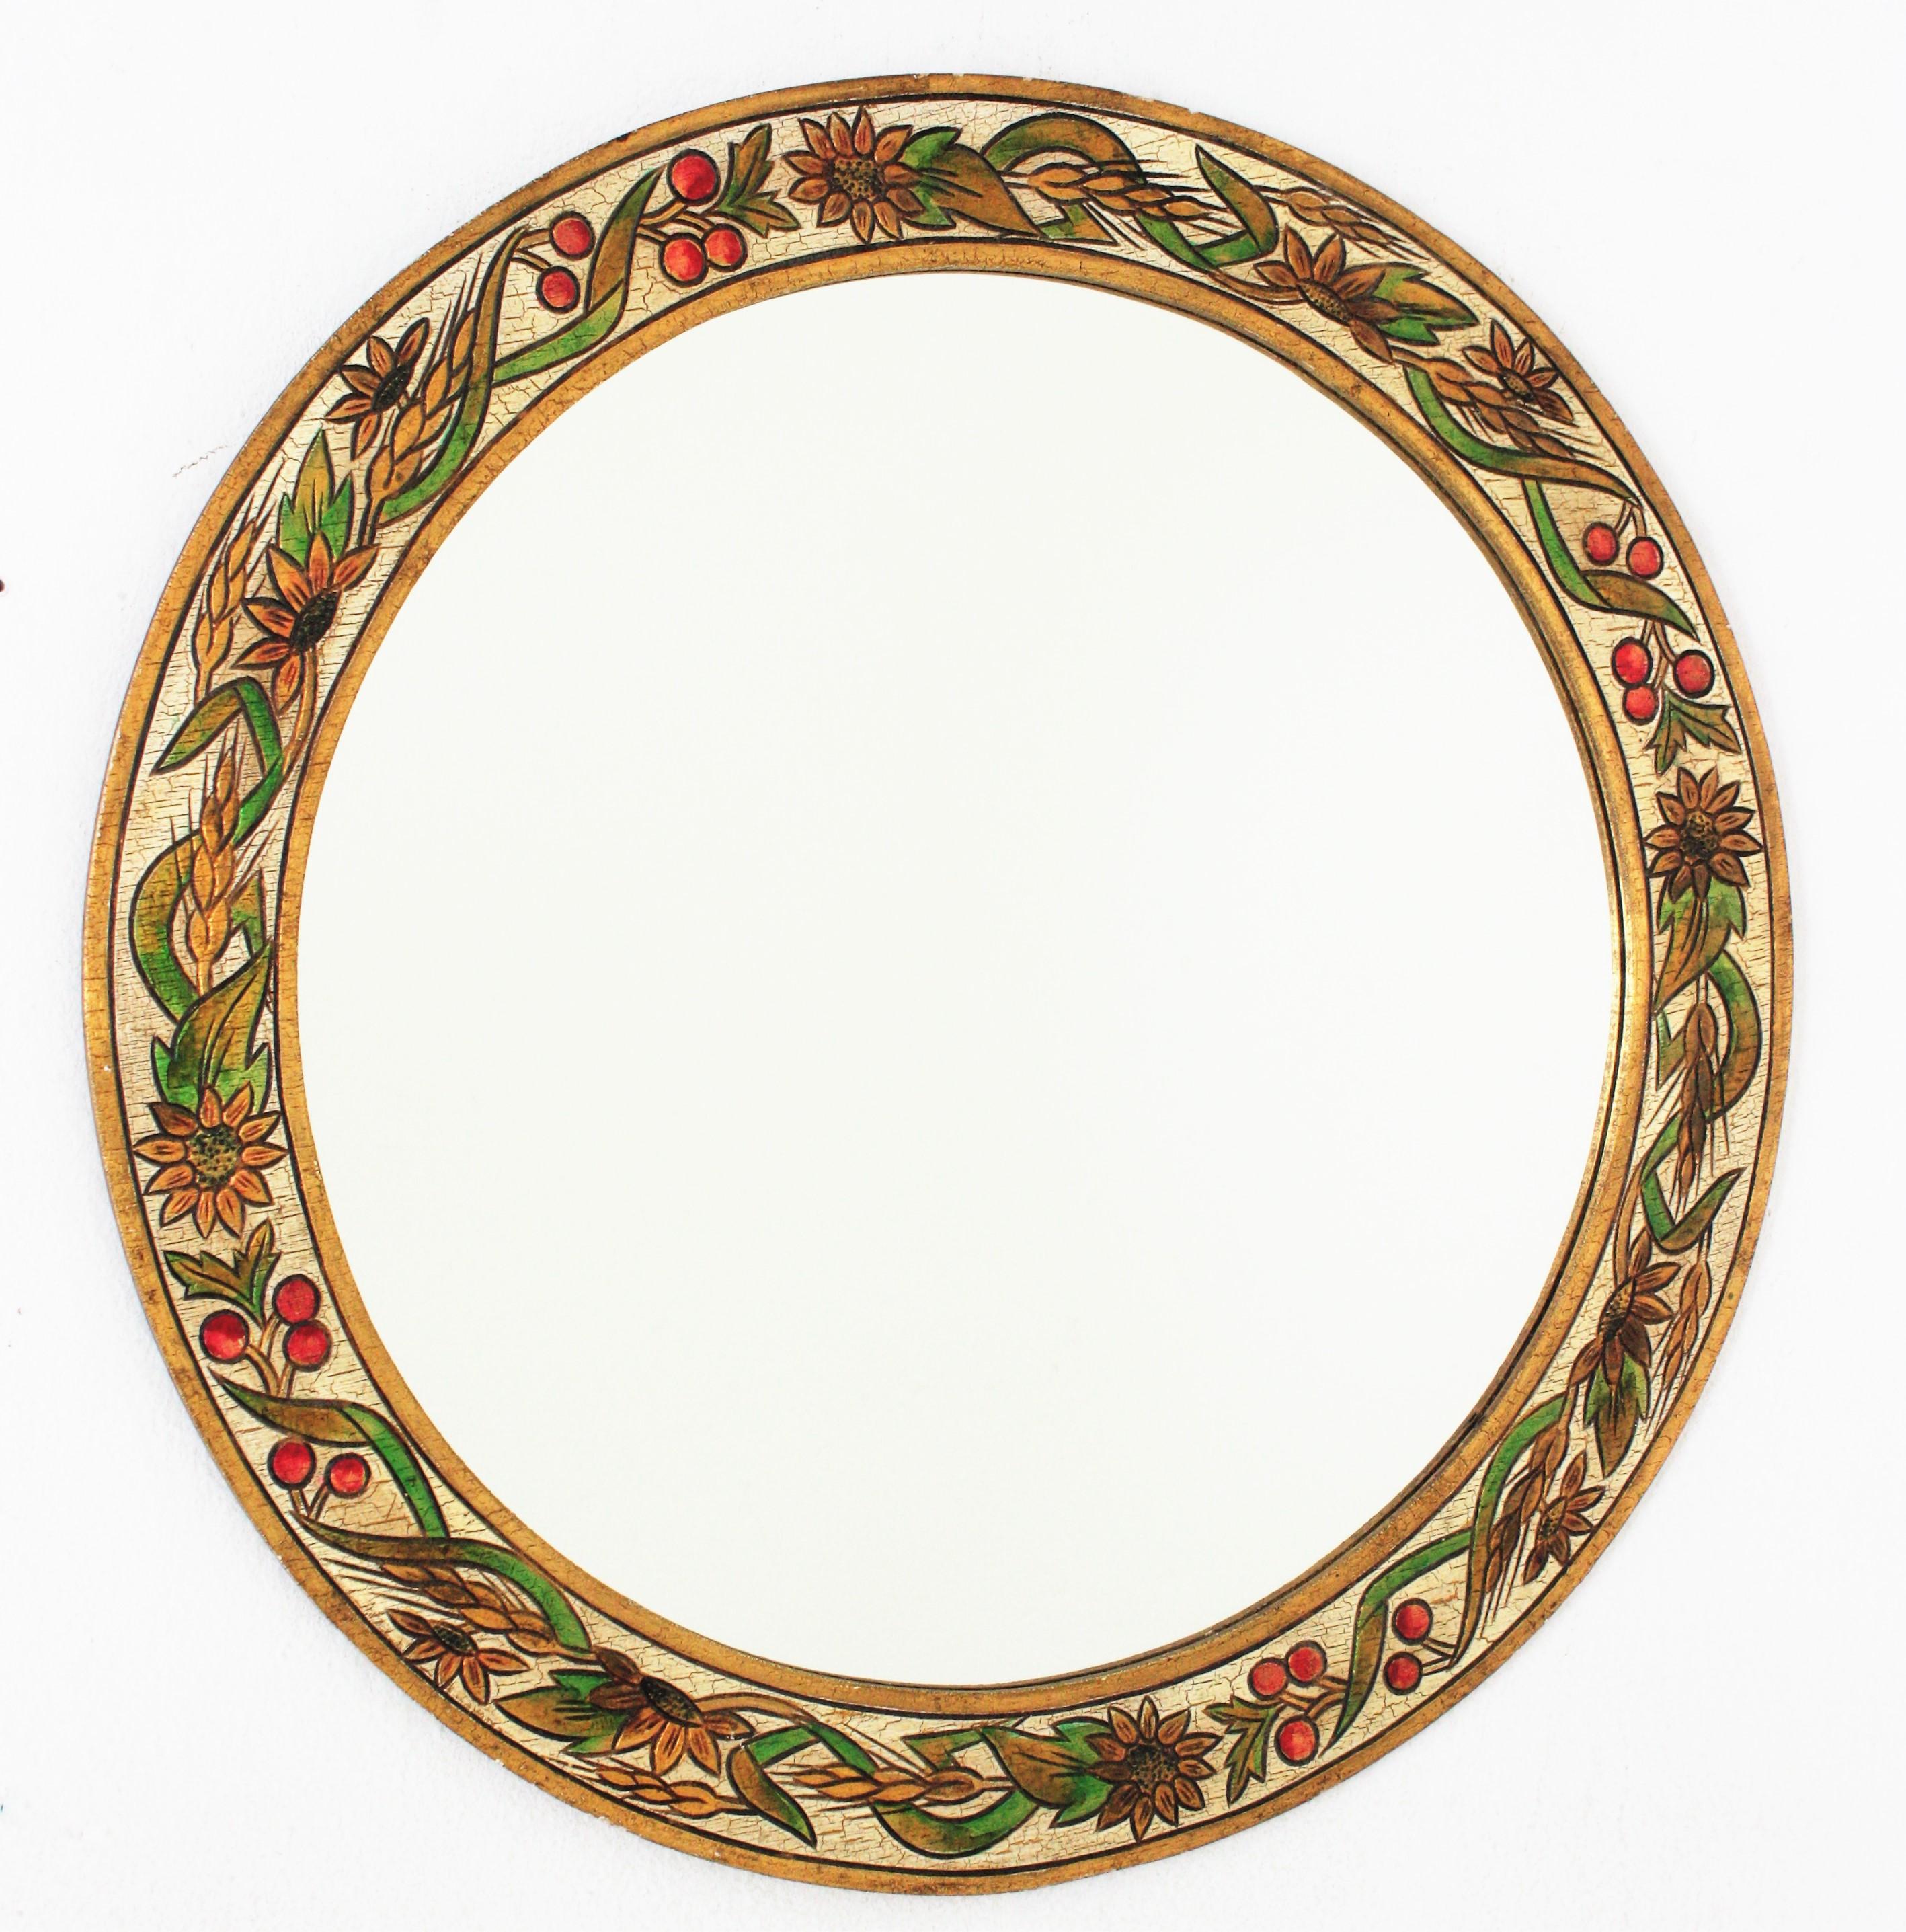 Round wall mirror in Pyrography polychrome wood, Spain, 1960s.
Beautiful handcrafted round mirror with pyrography and hand-painted decoration of leaves, fruits and flowers on the frame.
A colorful addition to any countryside house, beach house or